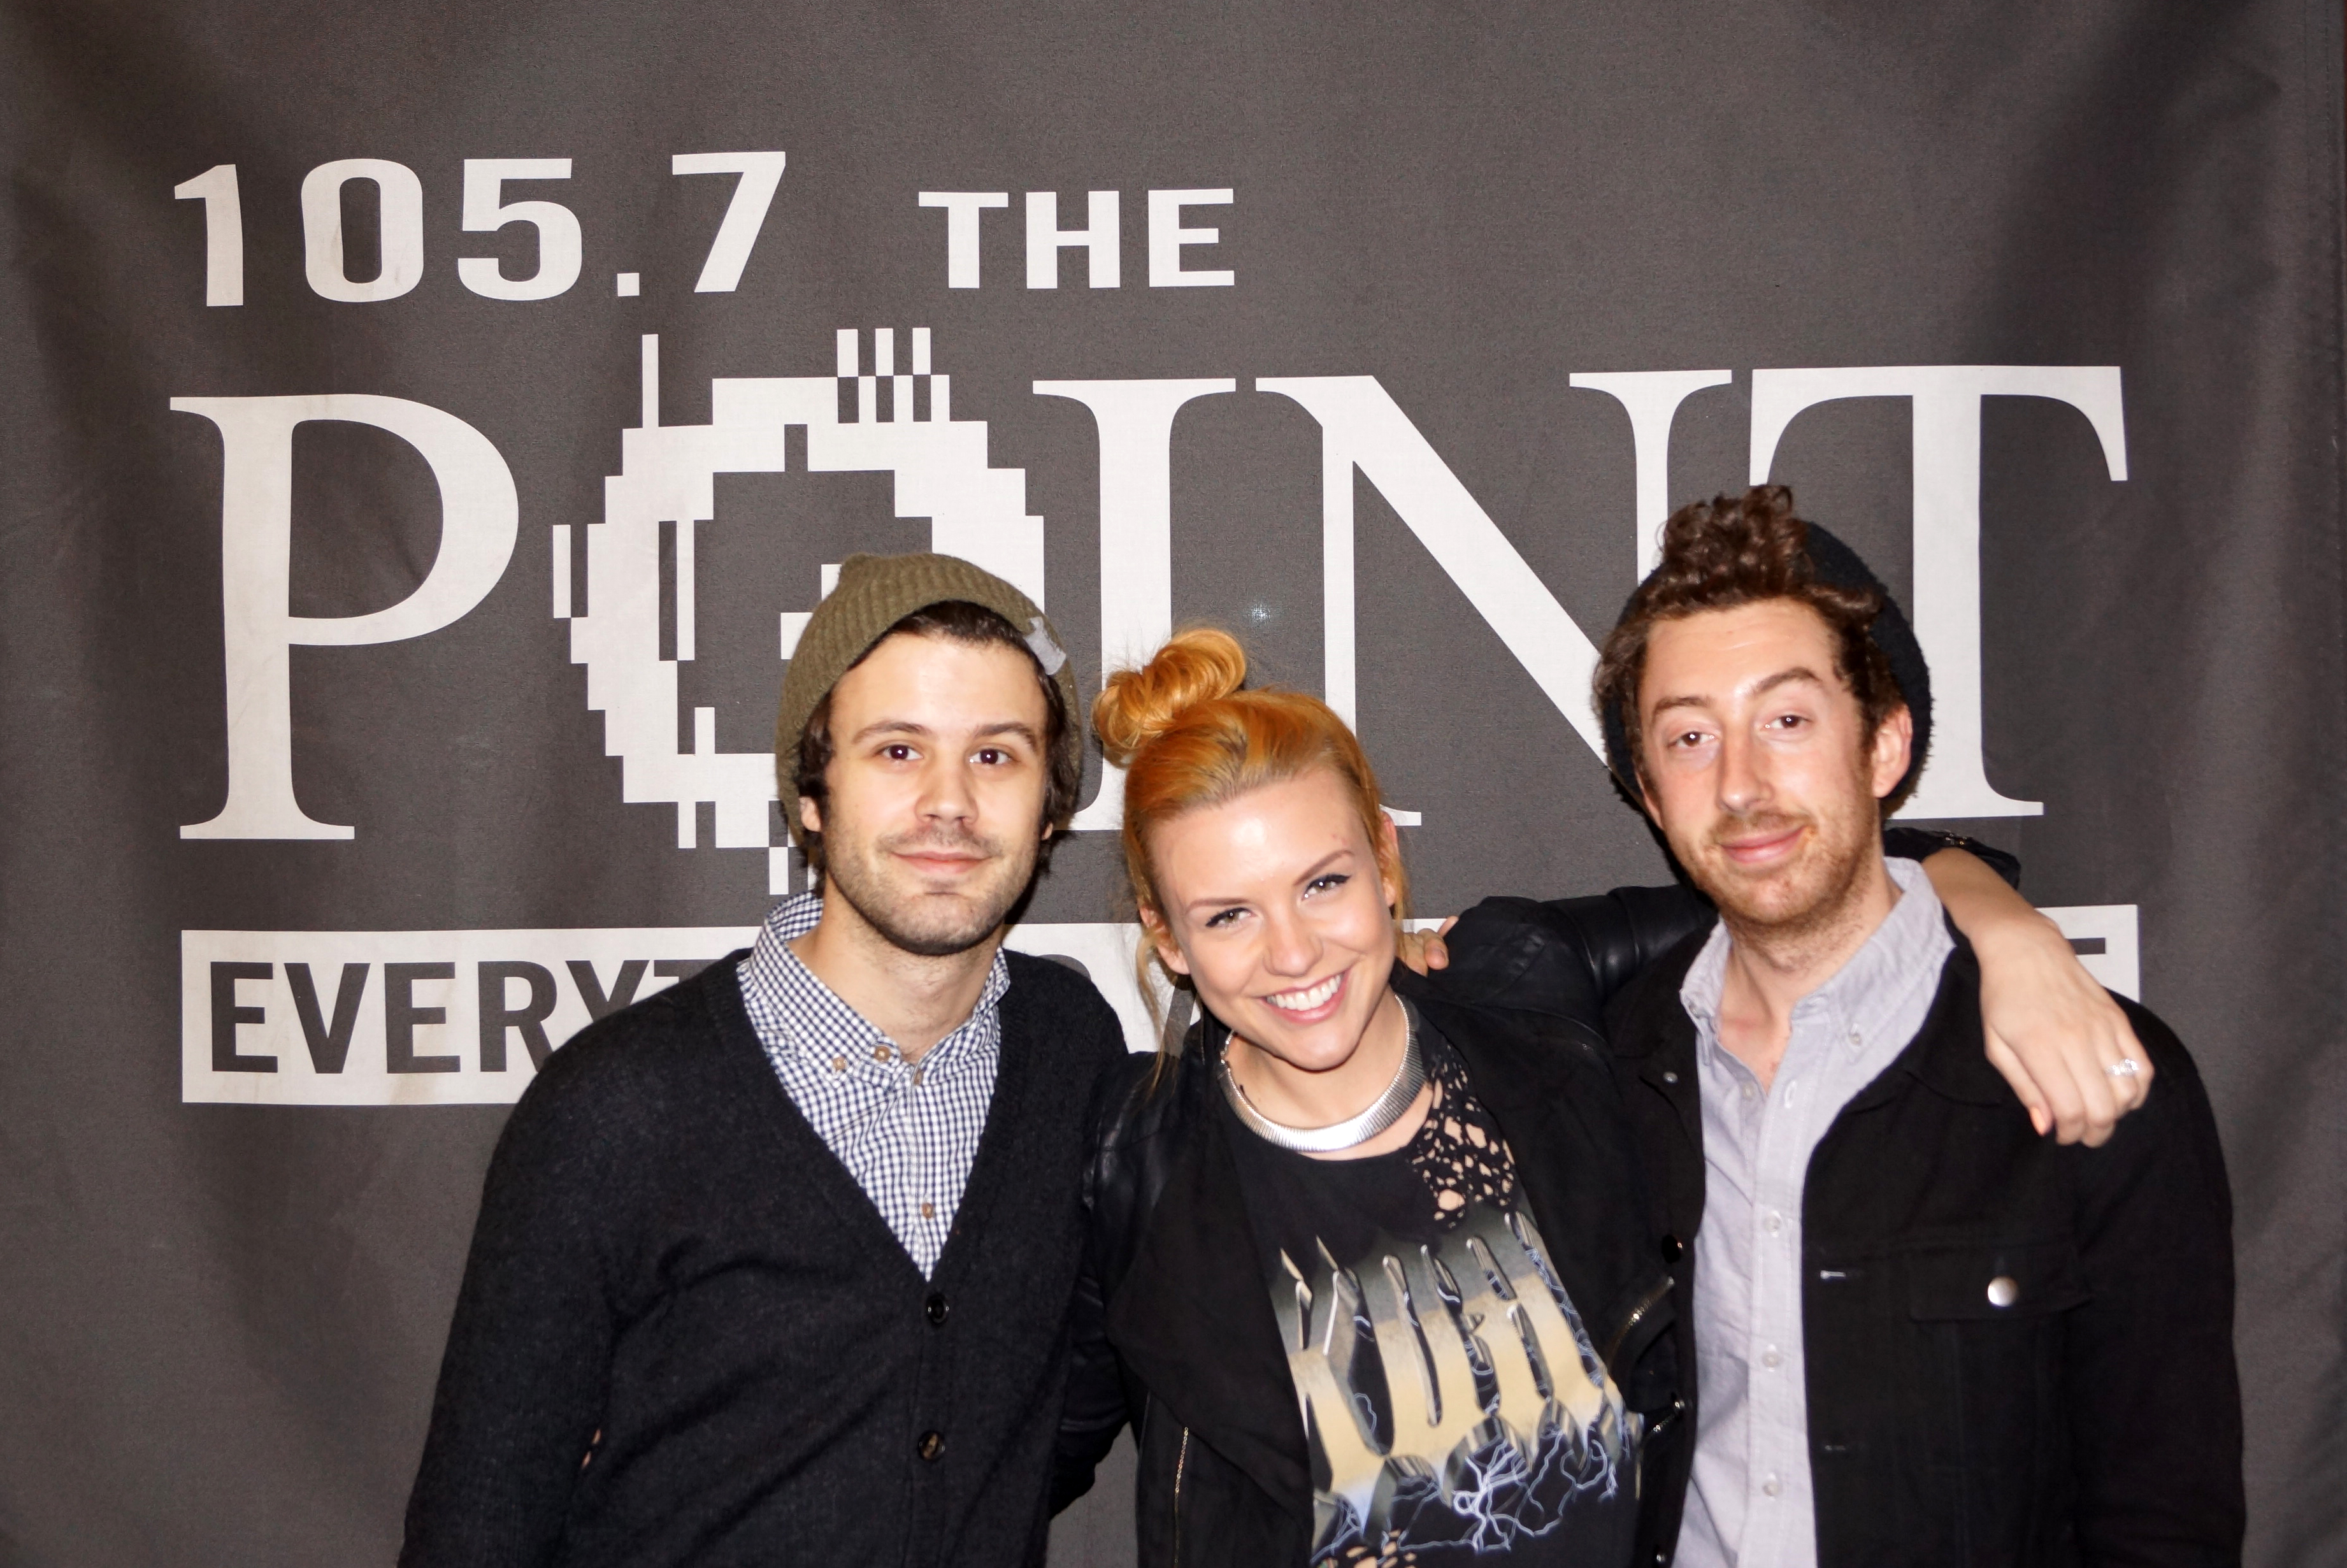 KPNT celebrated it's 20th Birthday with Passion Pit 